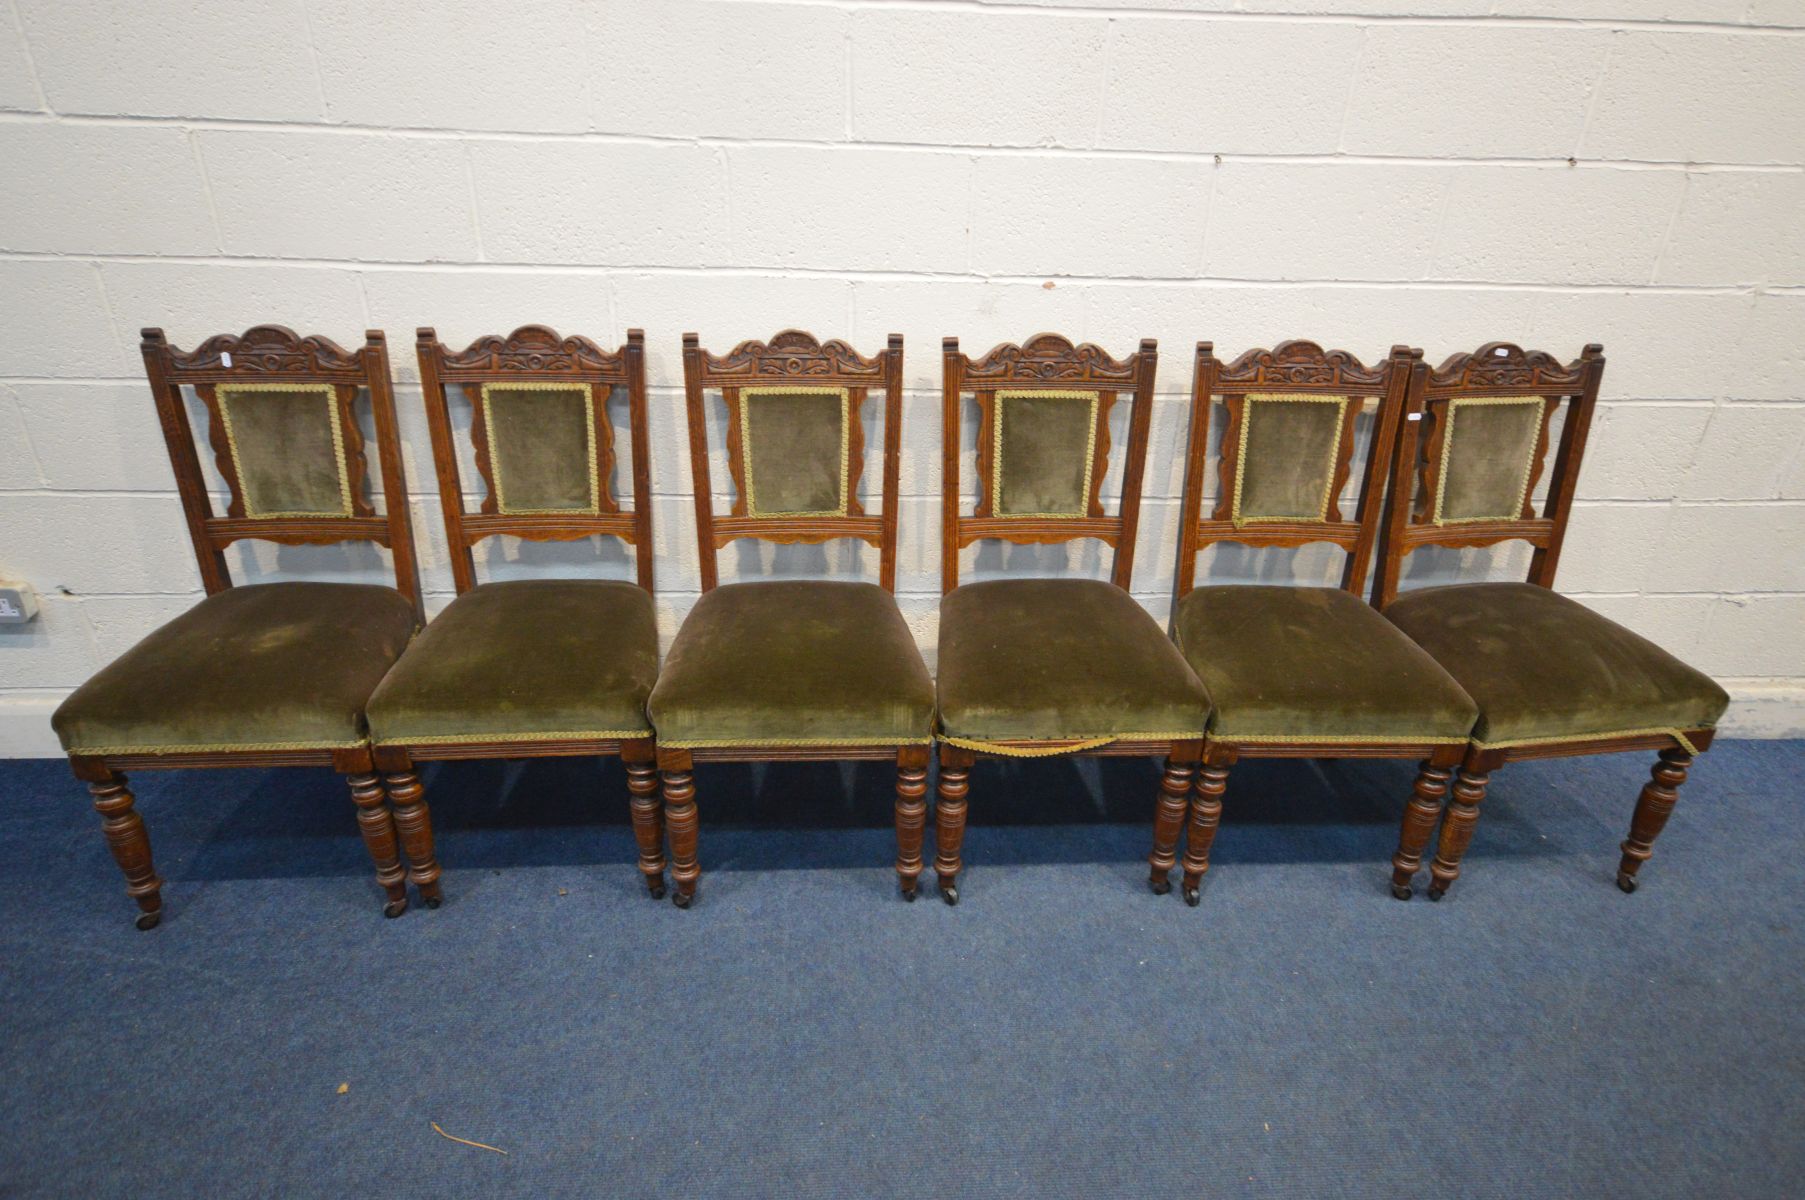 A SET OF SIX EDWARDIAN DINING CHAIRS with dark green upholstery on ceramic casters